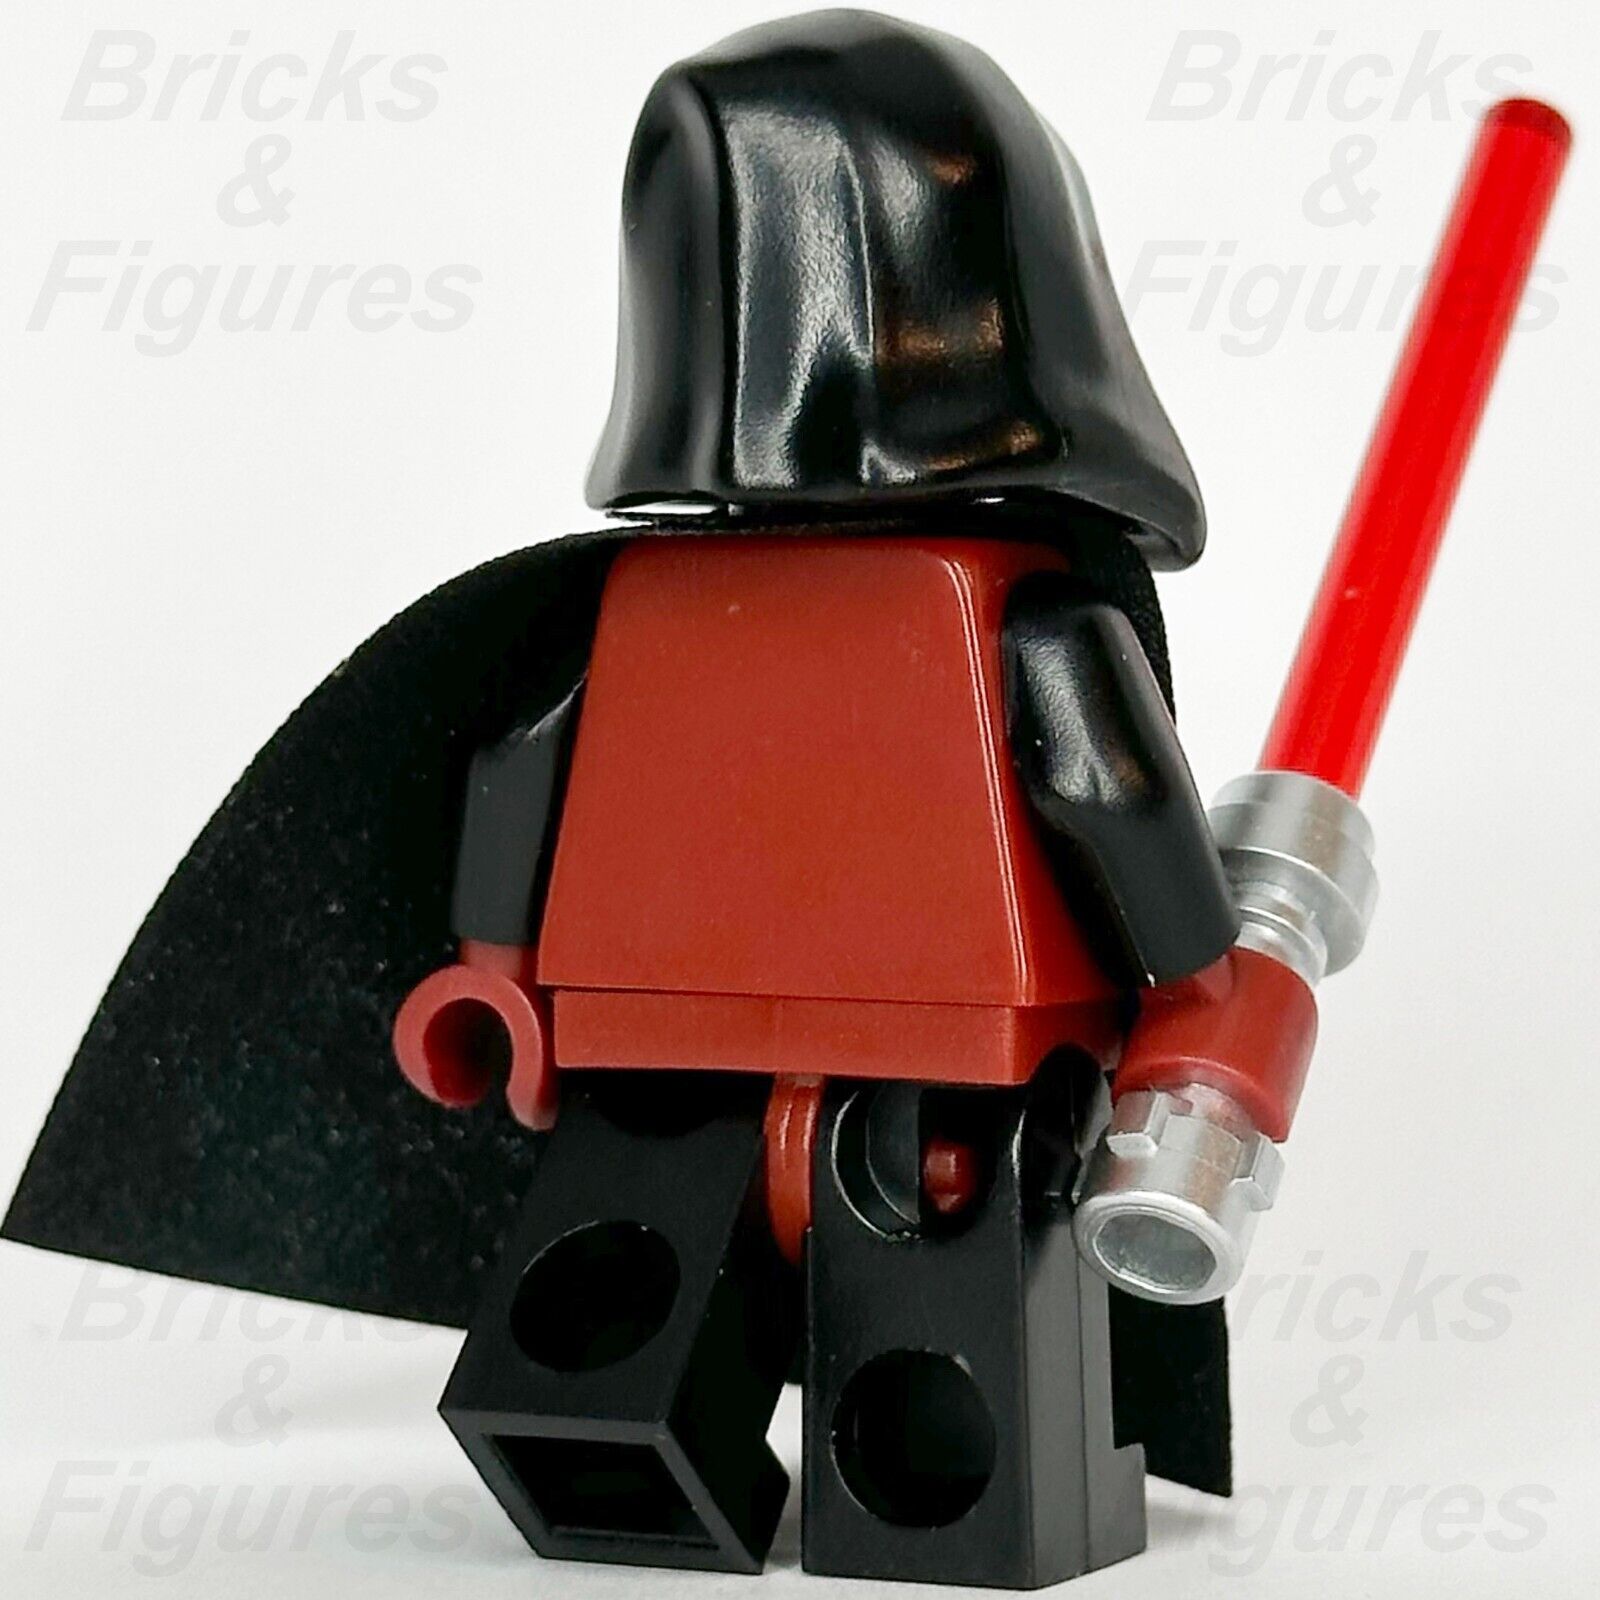 LEGO Star Wars Darth Revan Minifigure Knights of the Old Republic Sith sw0547